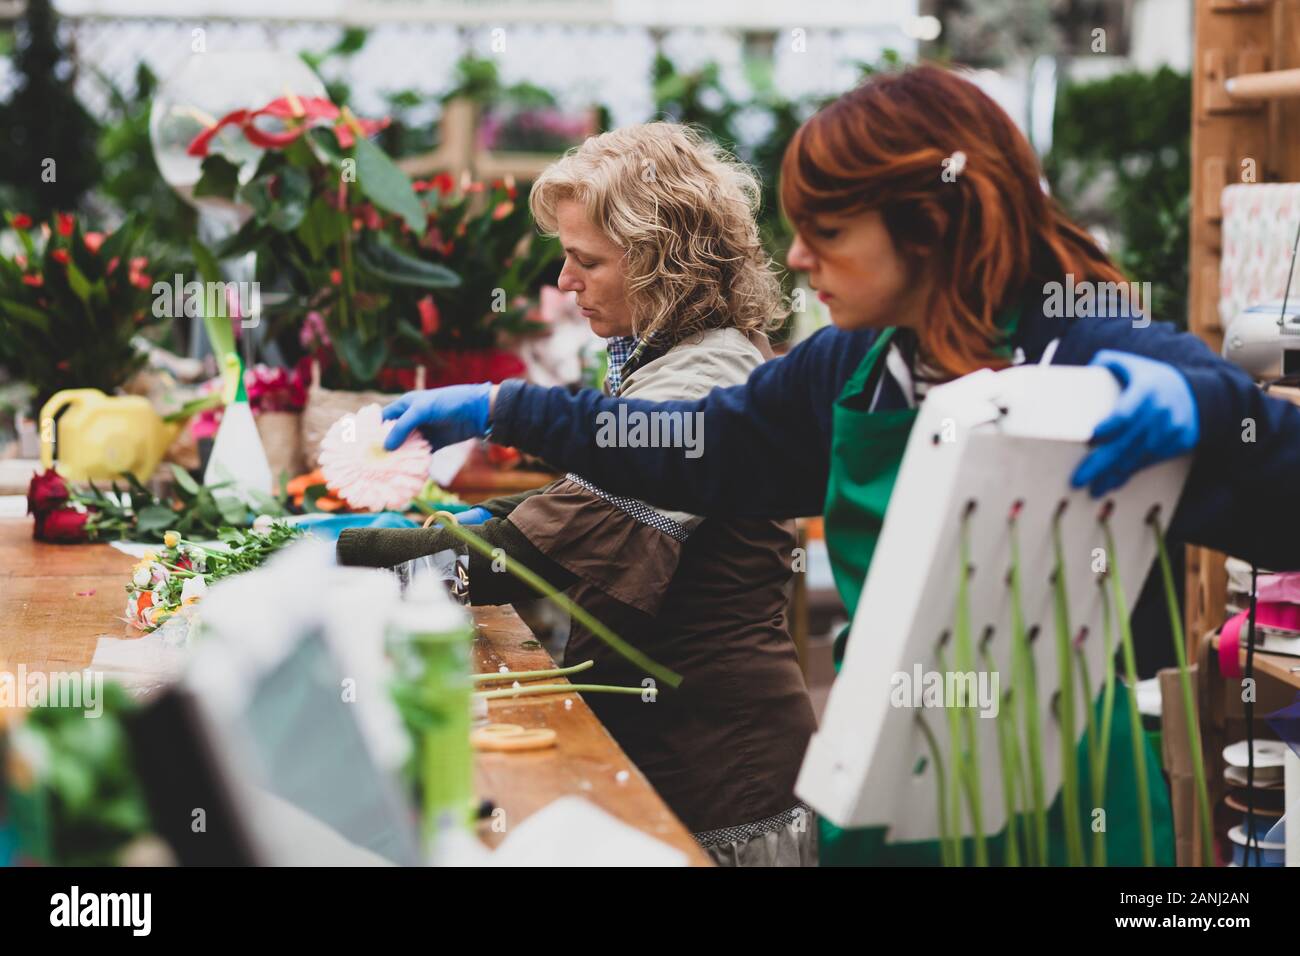 Two florists work in a nursery. Couple work in the gardening business on an ordinary working day. In the photo a blonde woman and a young woman with r Stock Photo